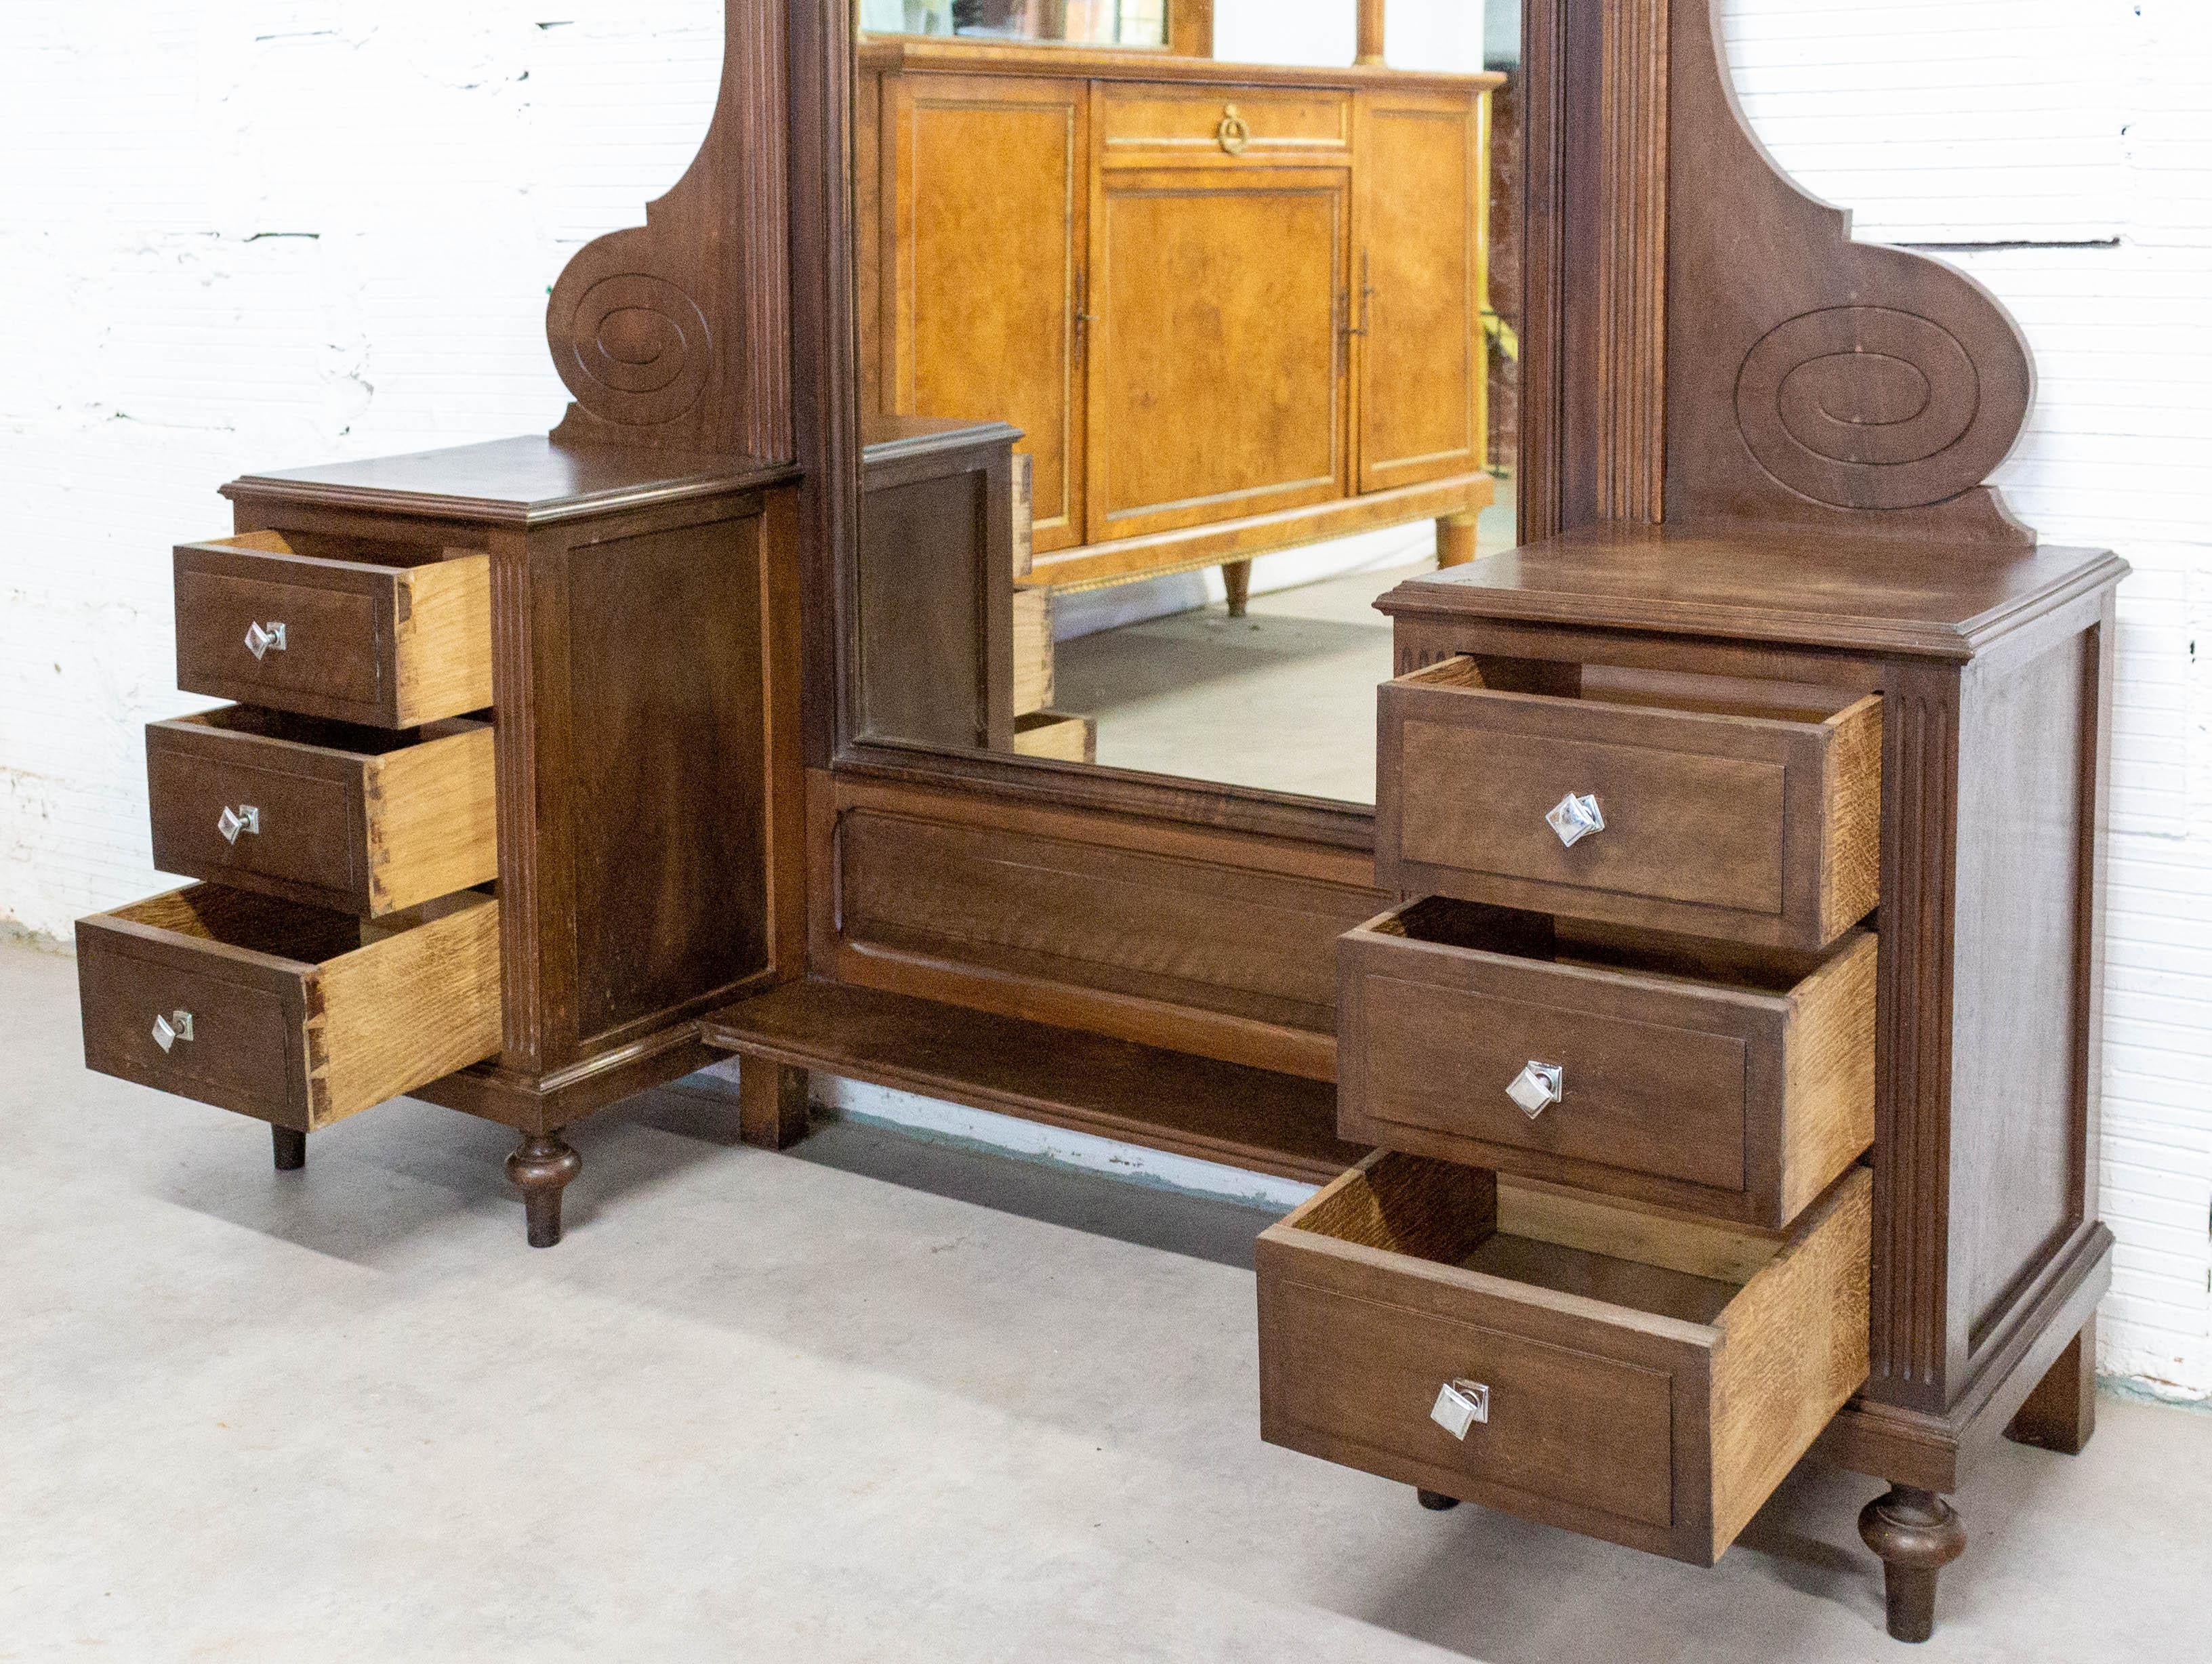 20th Century Psyche Full Length Mirror Dressing Table with Drawers, French, circa 1940